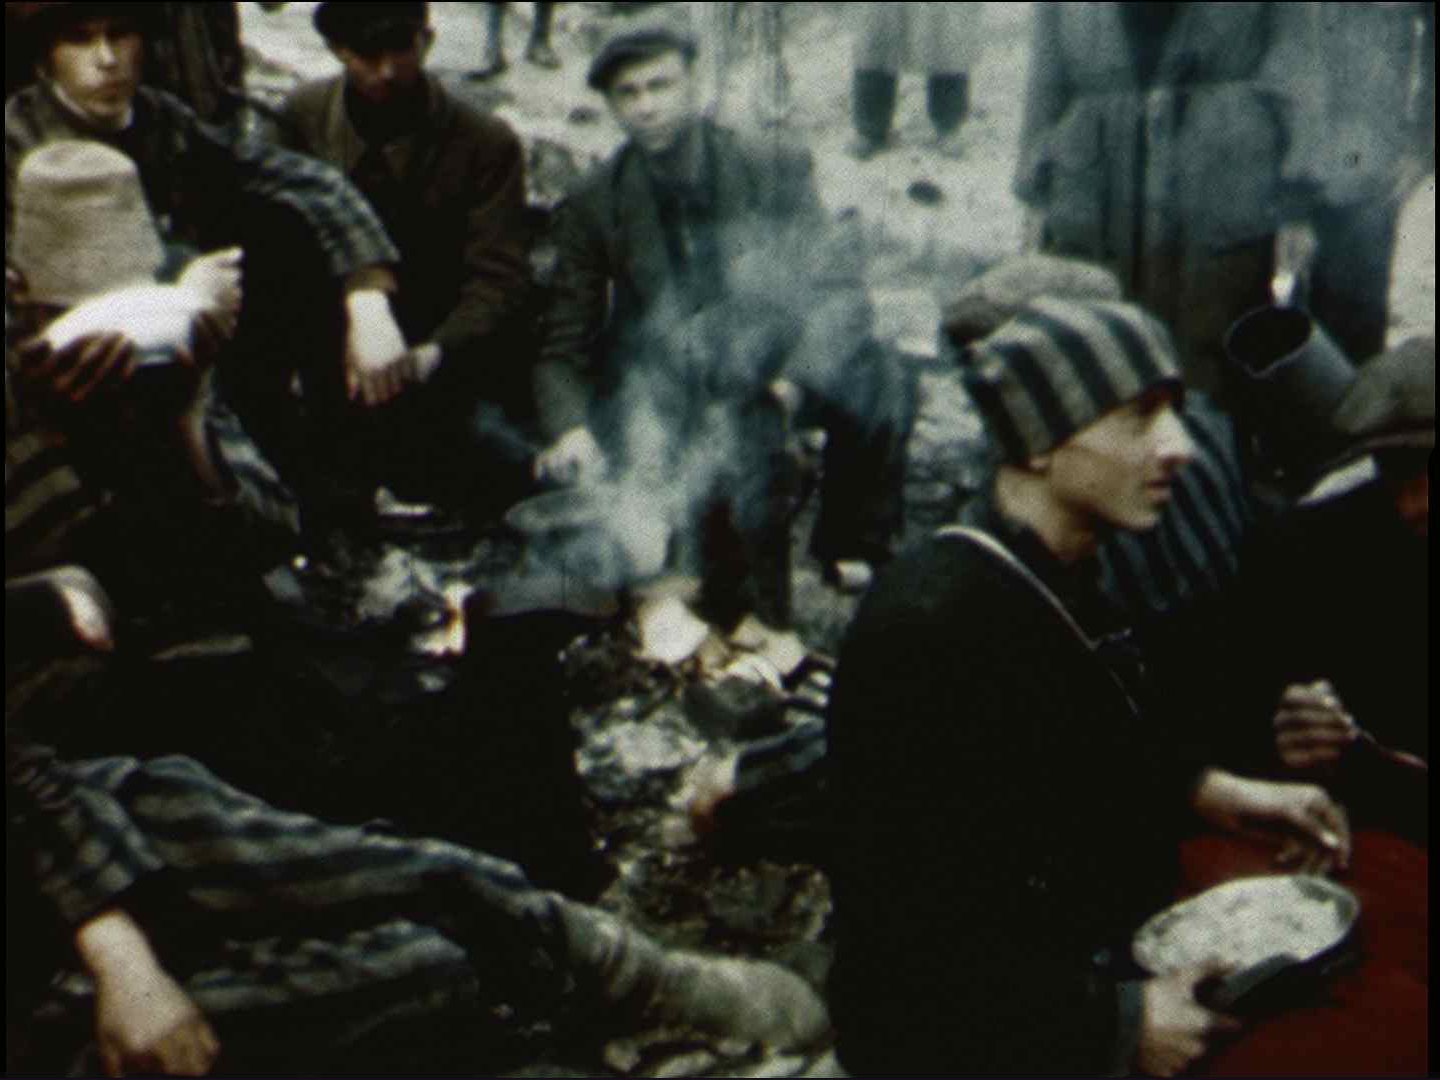 Norman Krasna: Lest we forget (Liberation footage)